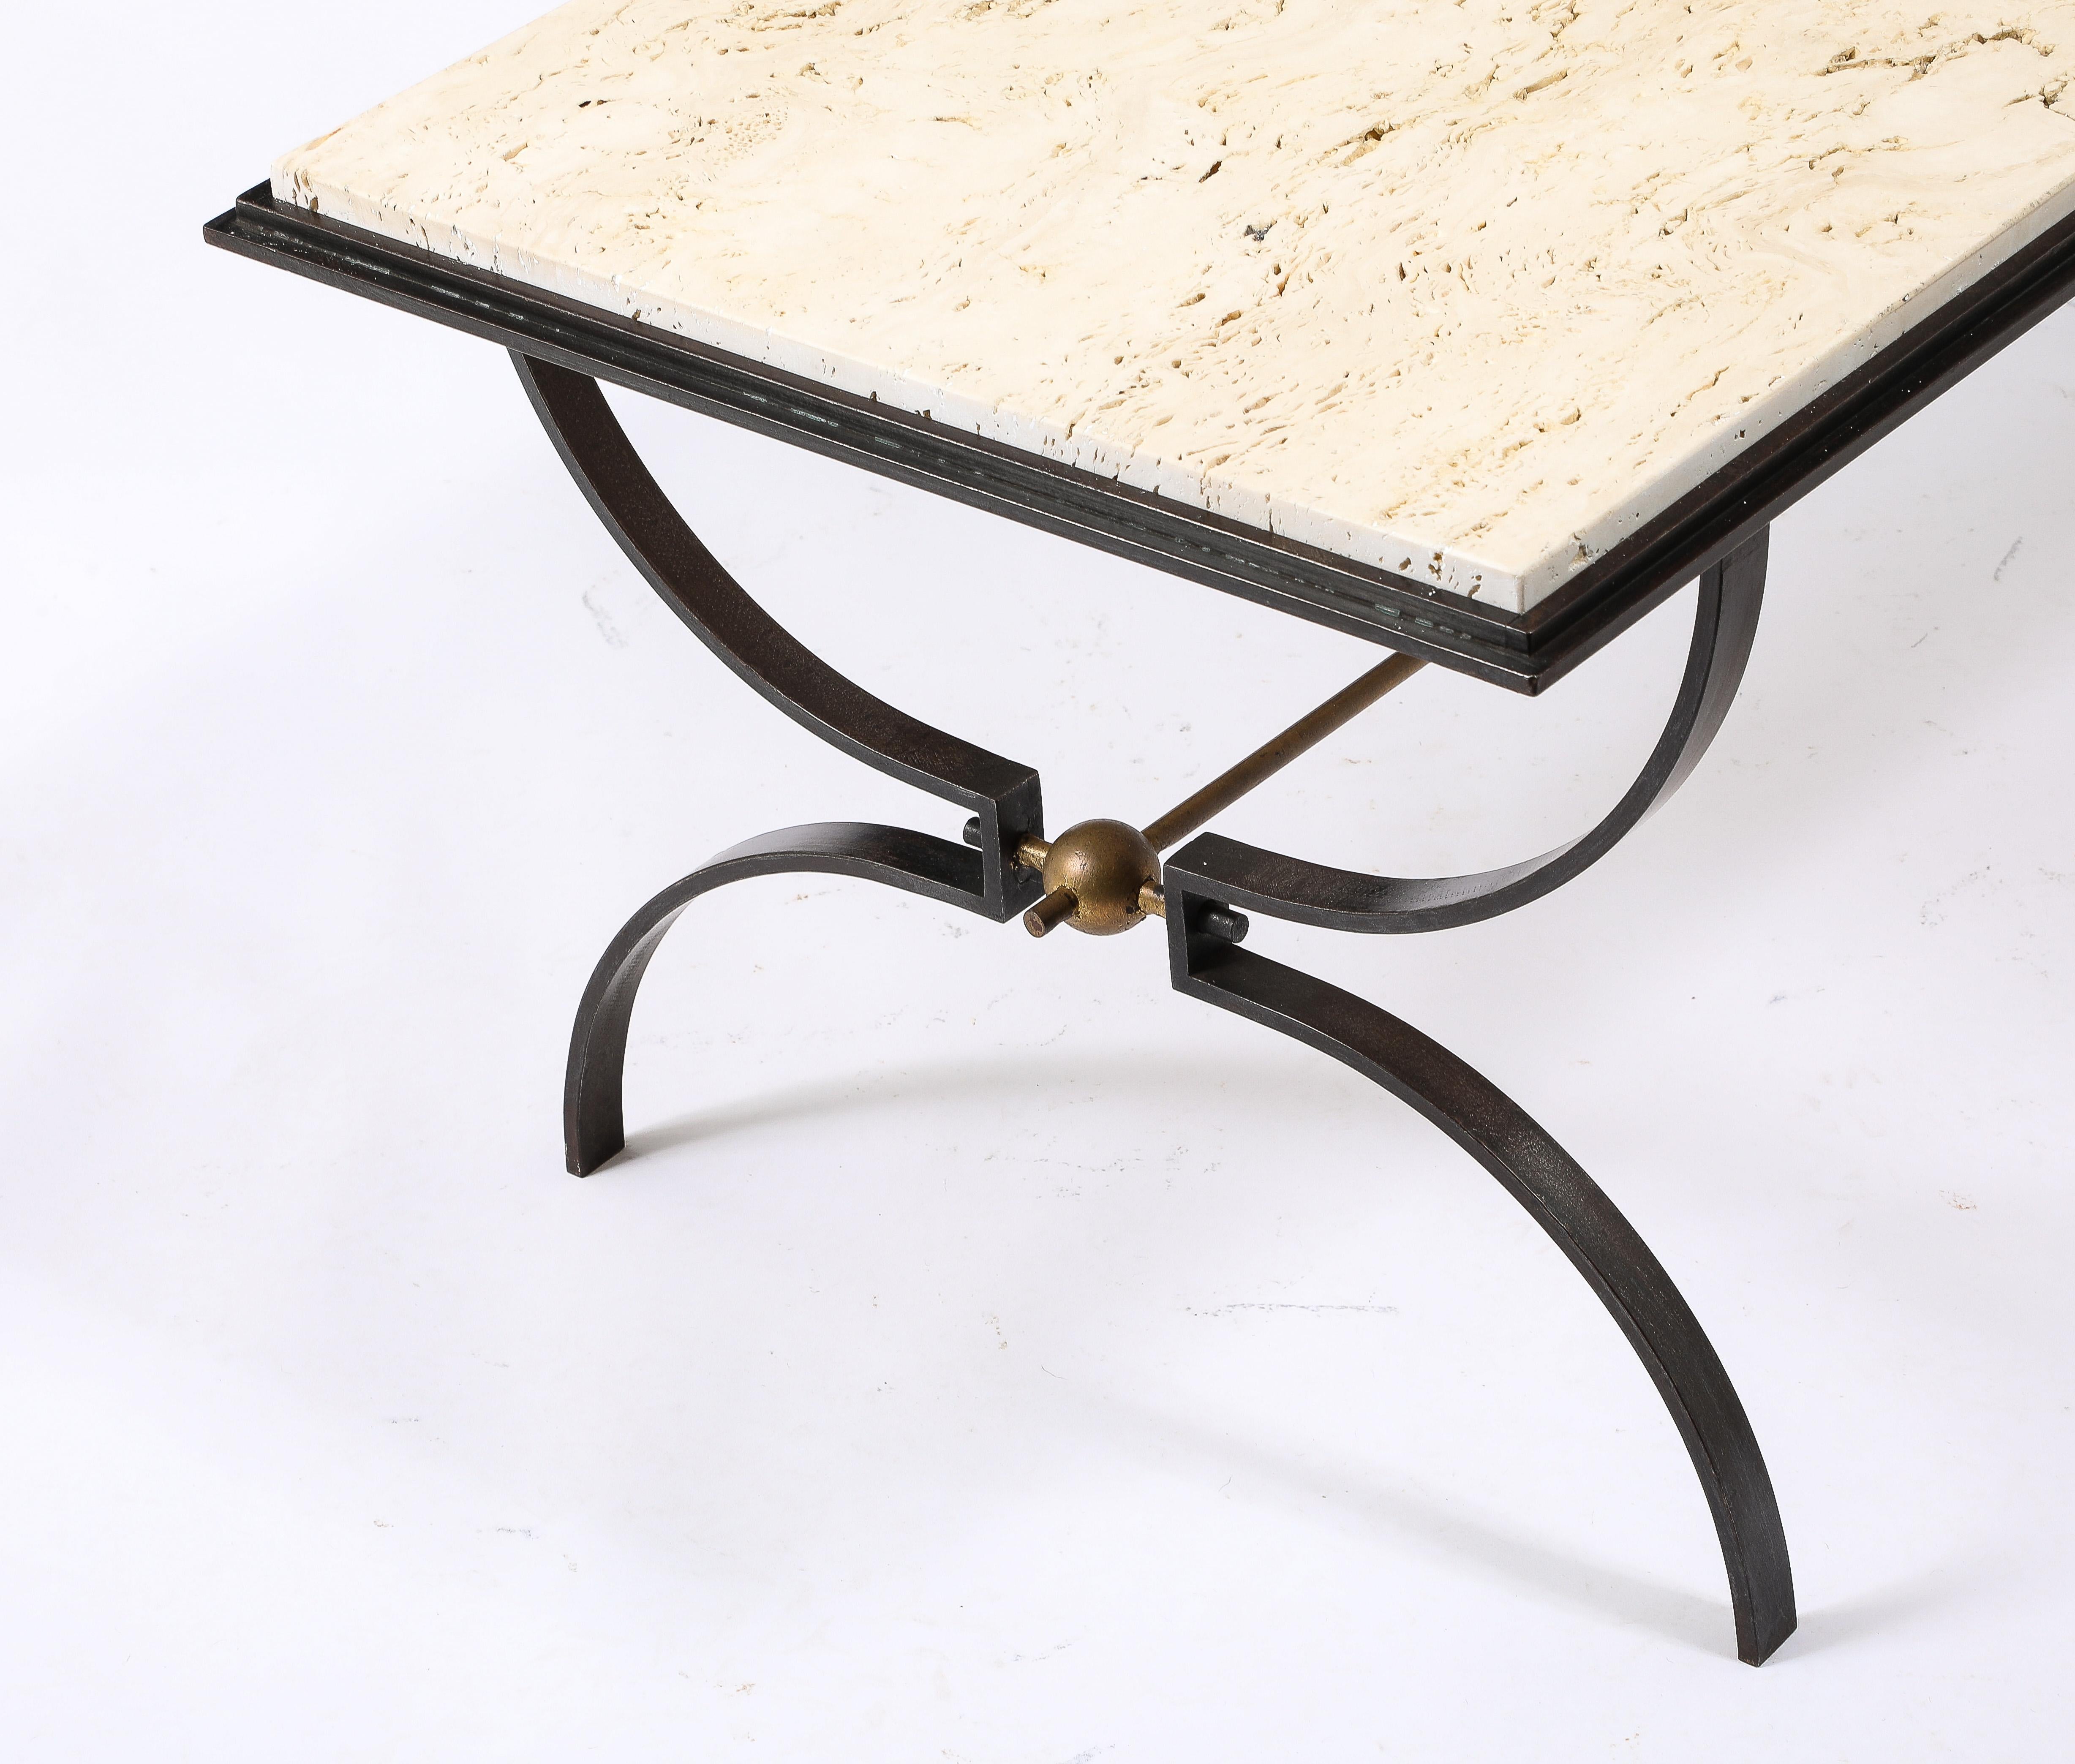 French Maison jansen Travertine and Wrought Iron Coffee Table For Sale